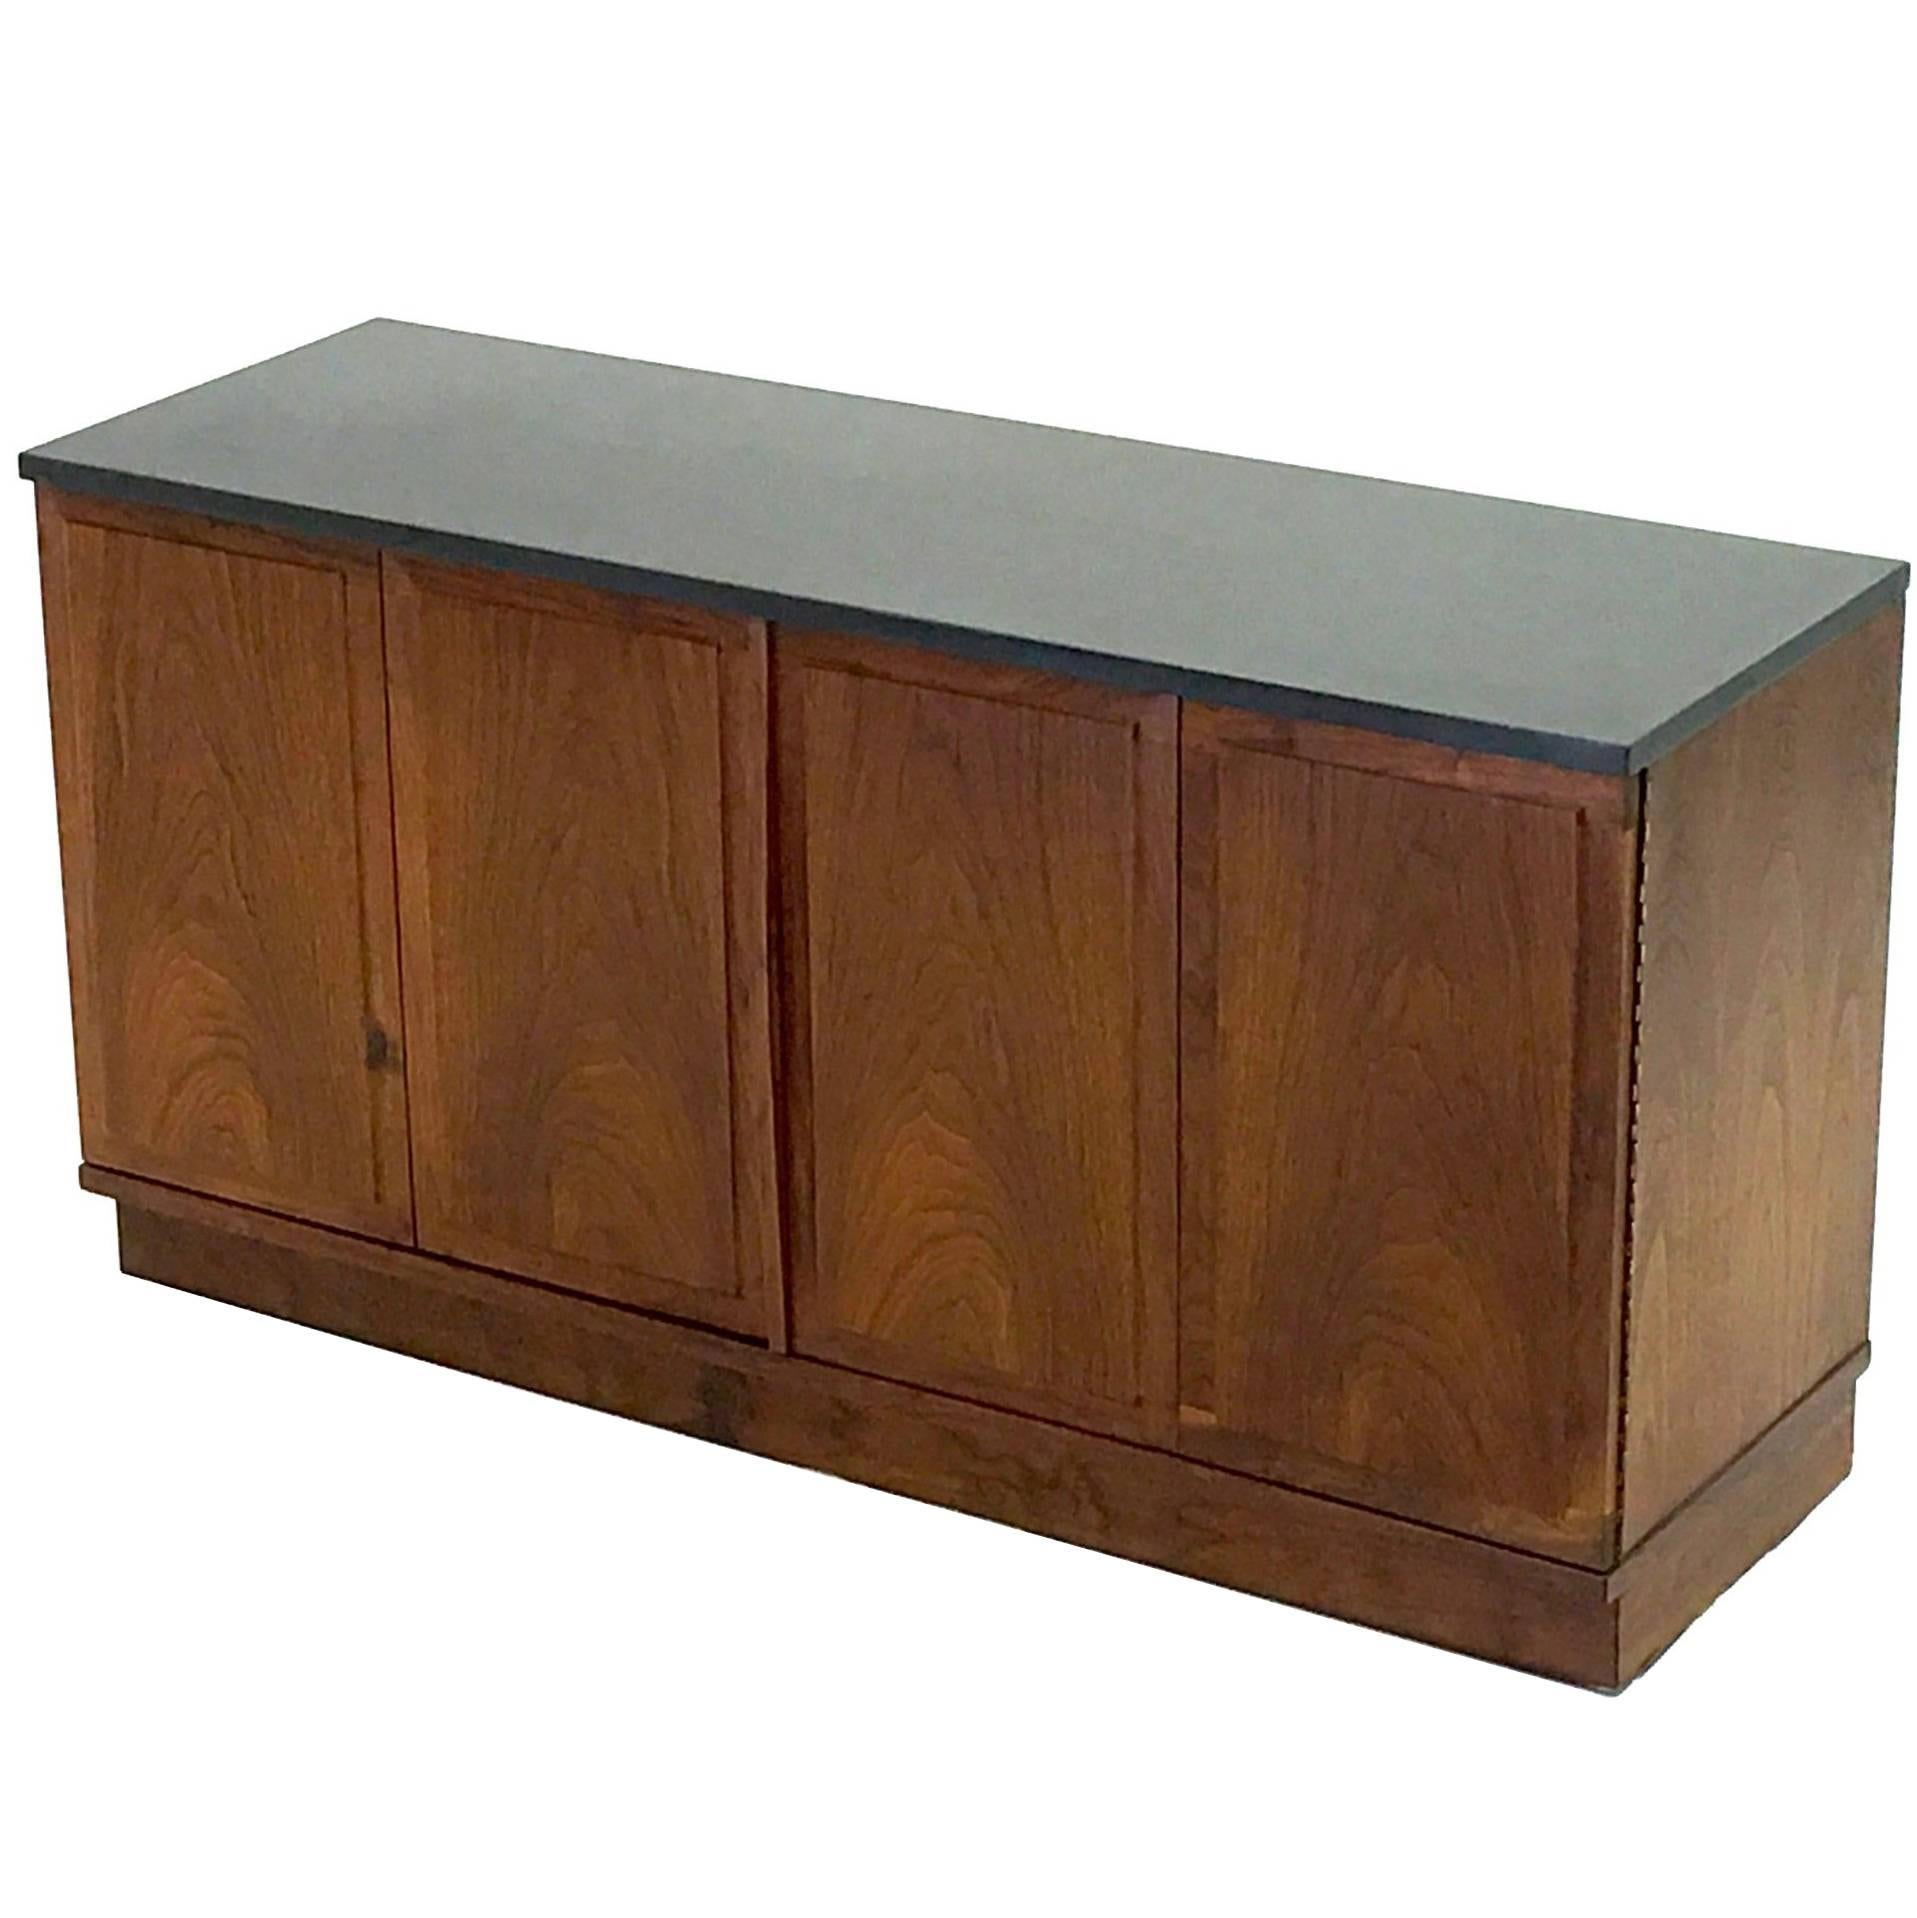 Diminutive Slate and Walnut Console Cabinet with Low Profile